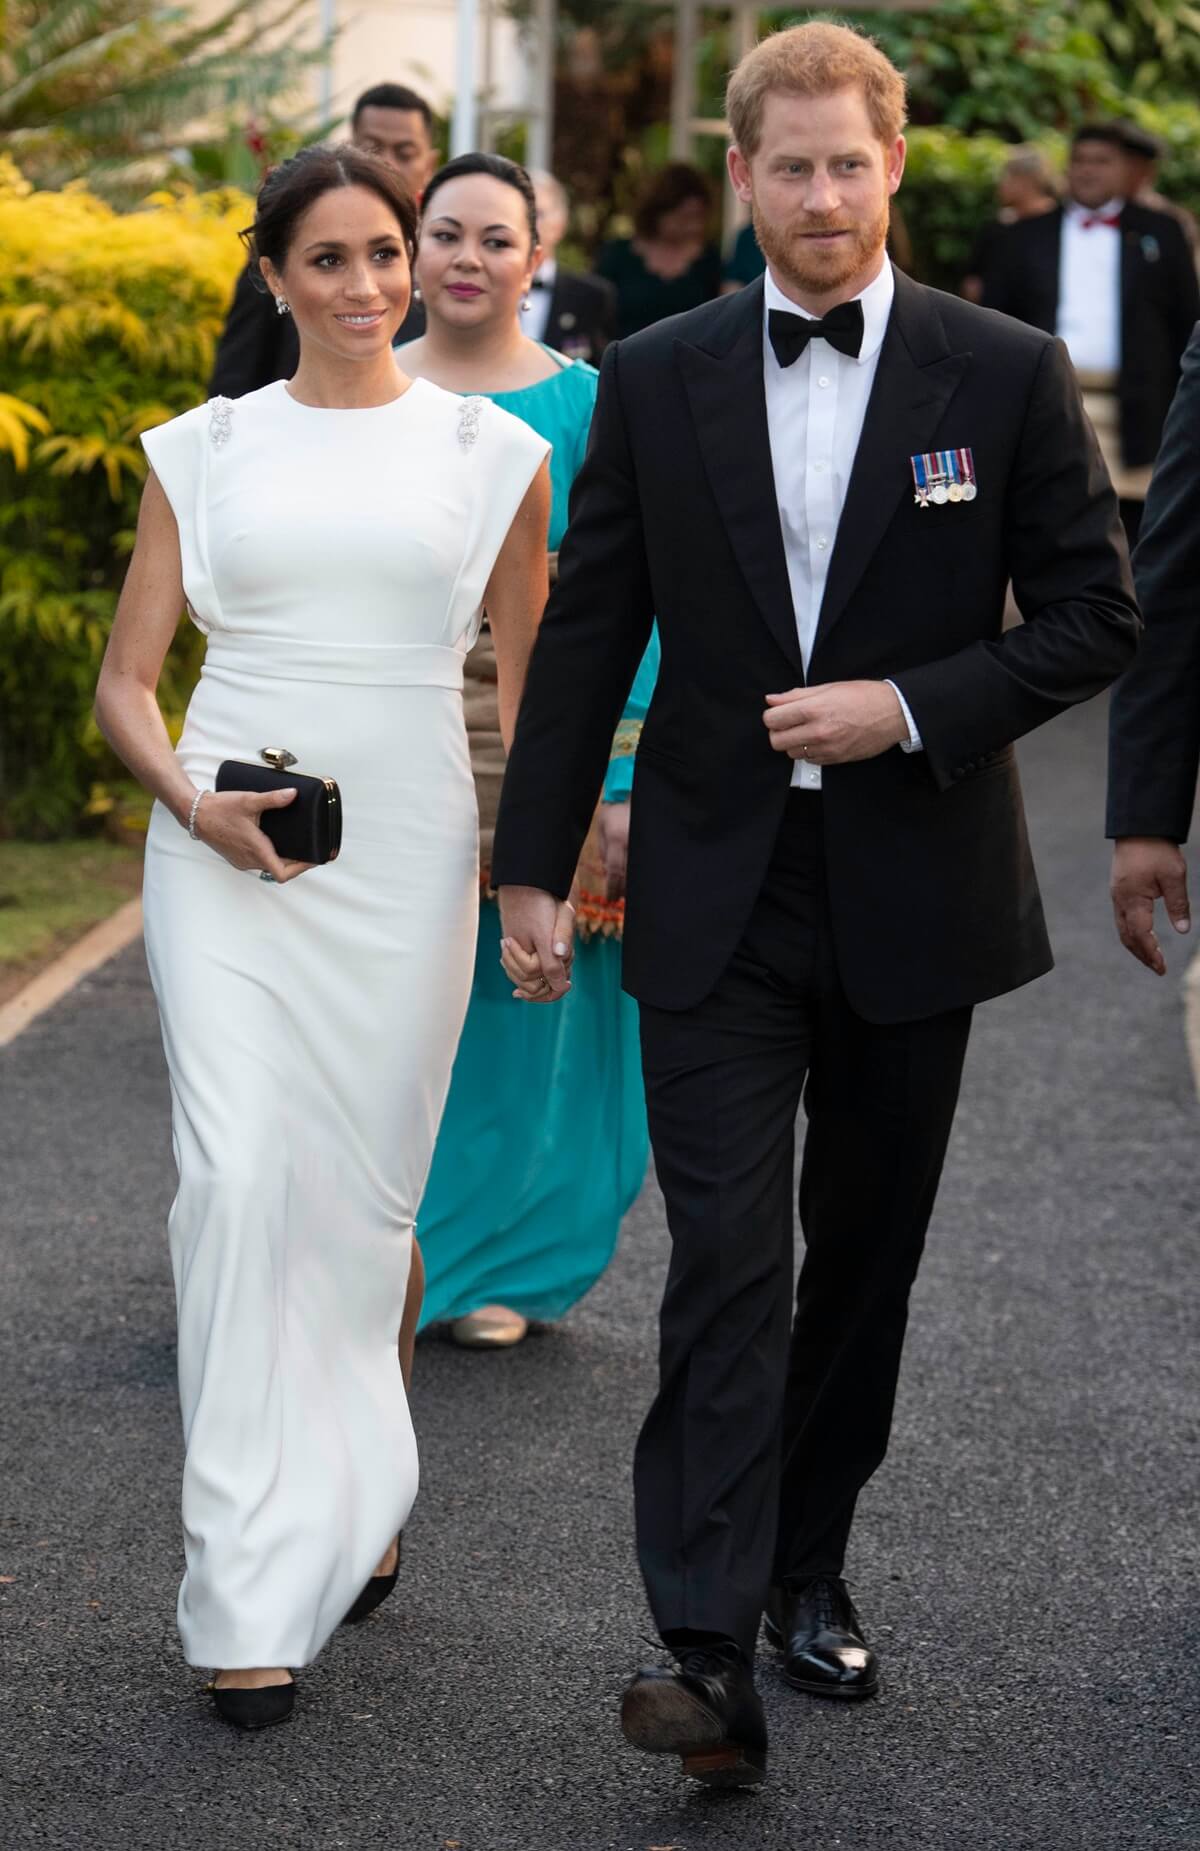 Meghan Markle and Prince Harry attend a state dinner at the Royal Residence in Nuku'alofa, Tonga